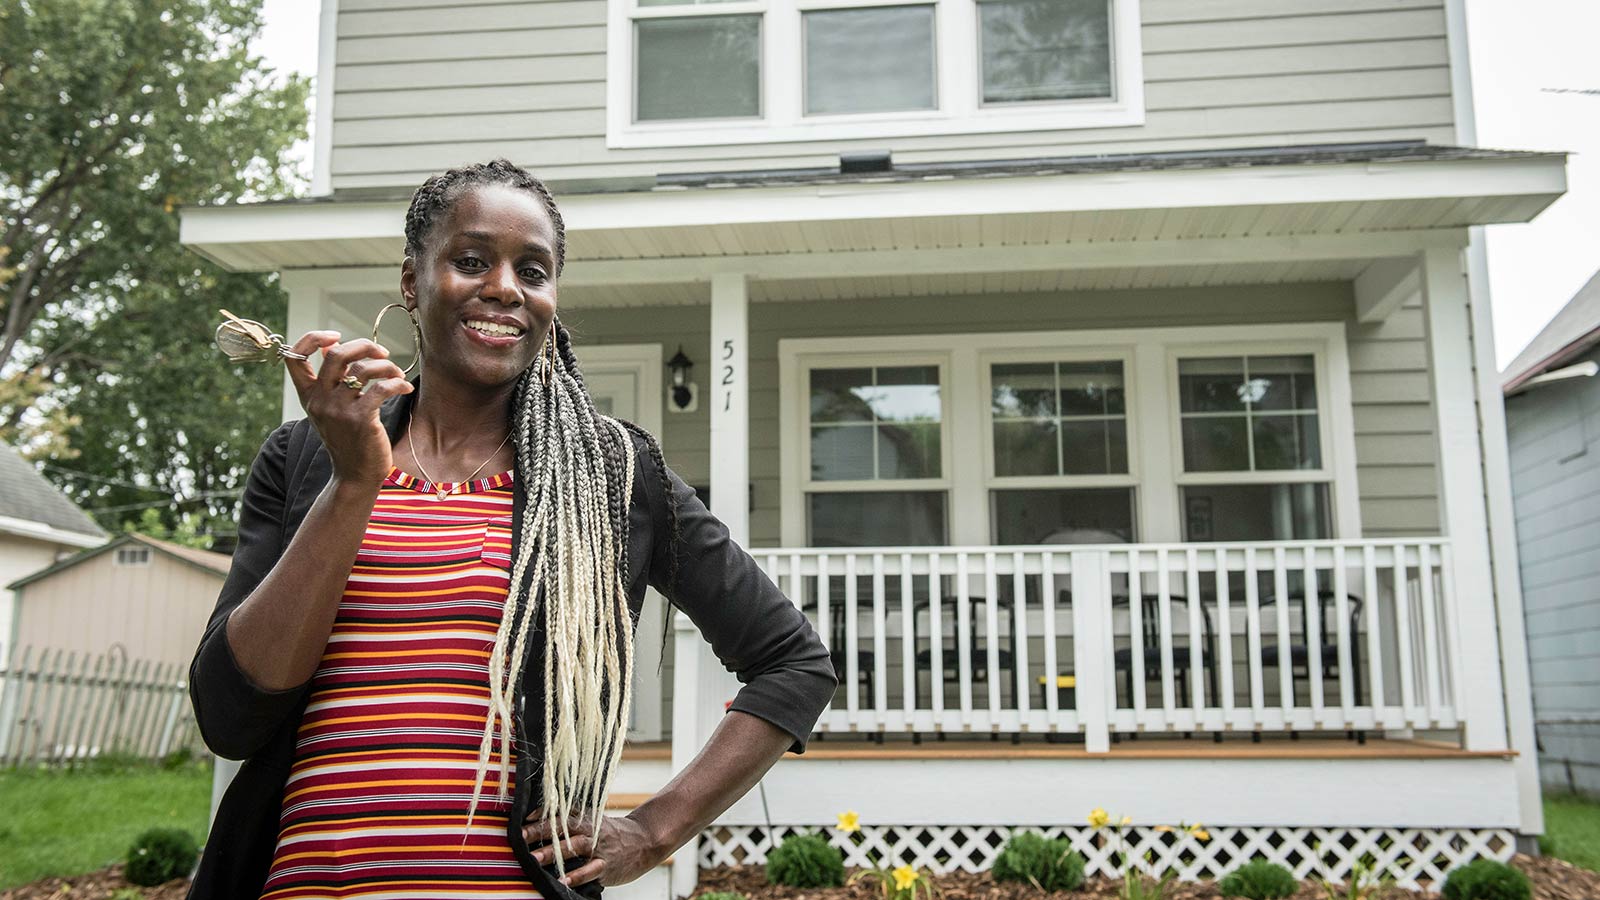 LeAndra smiling in front of her house with keys in hand - donate page